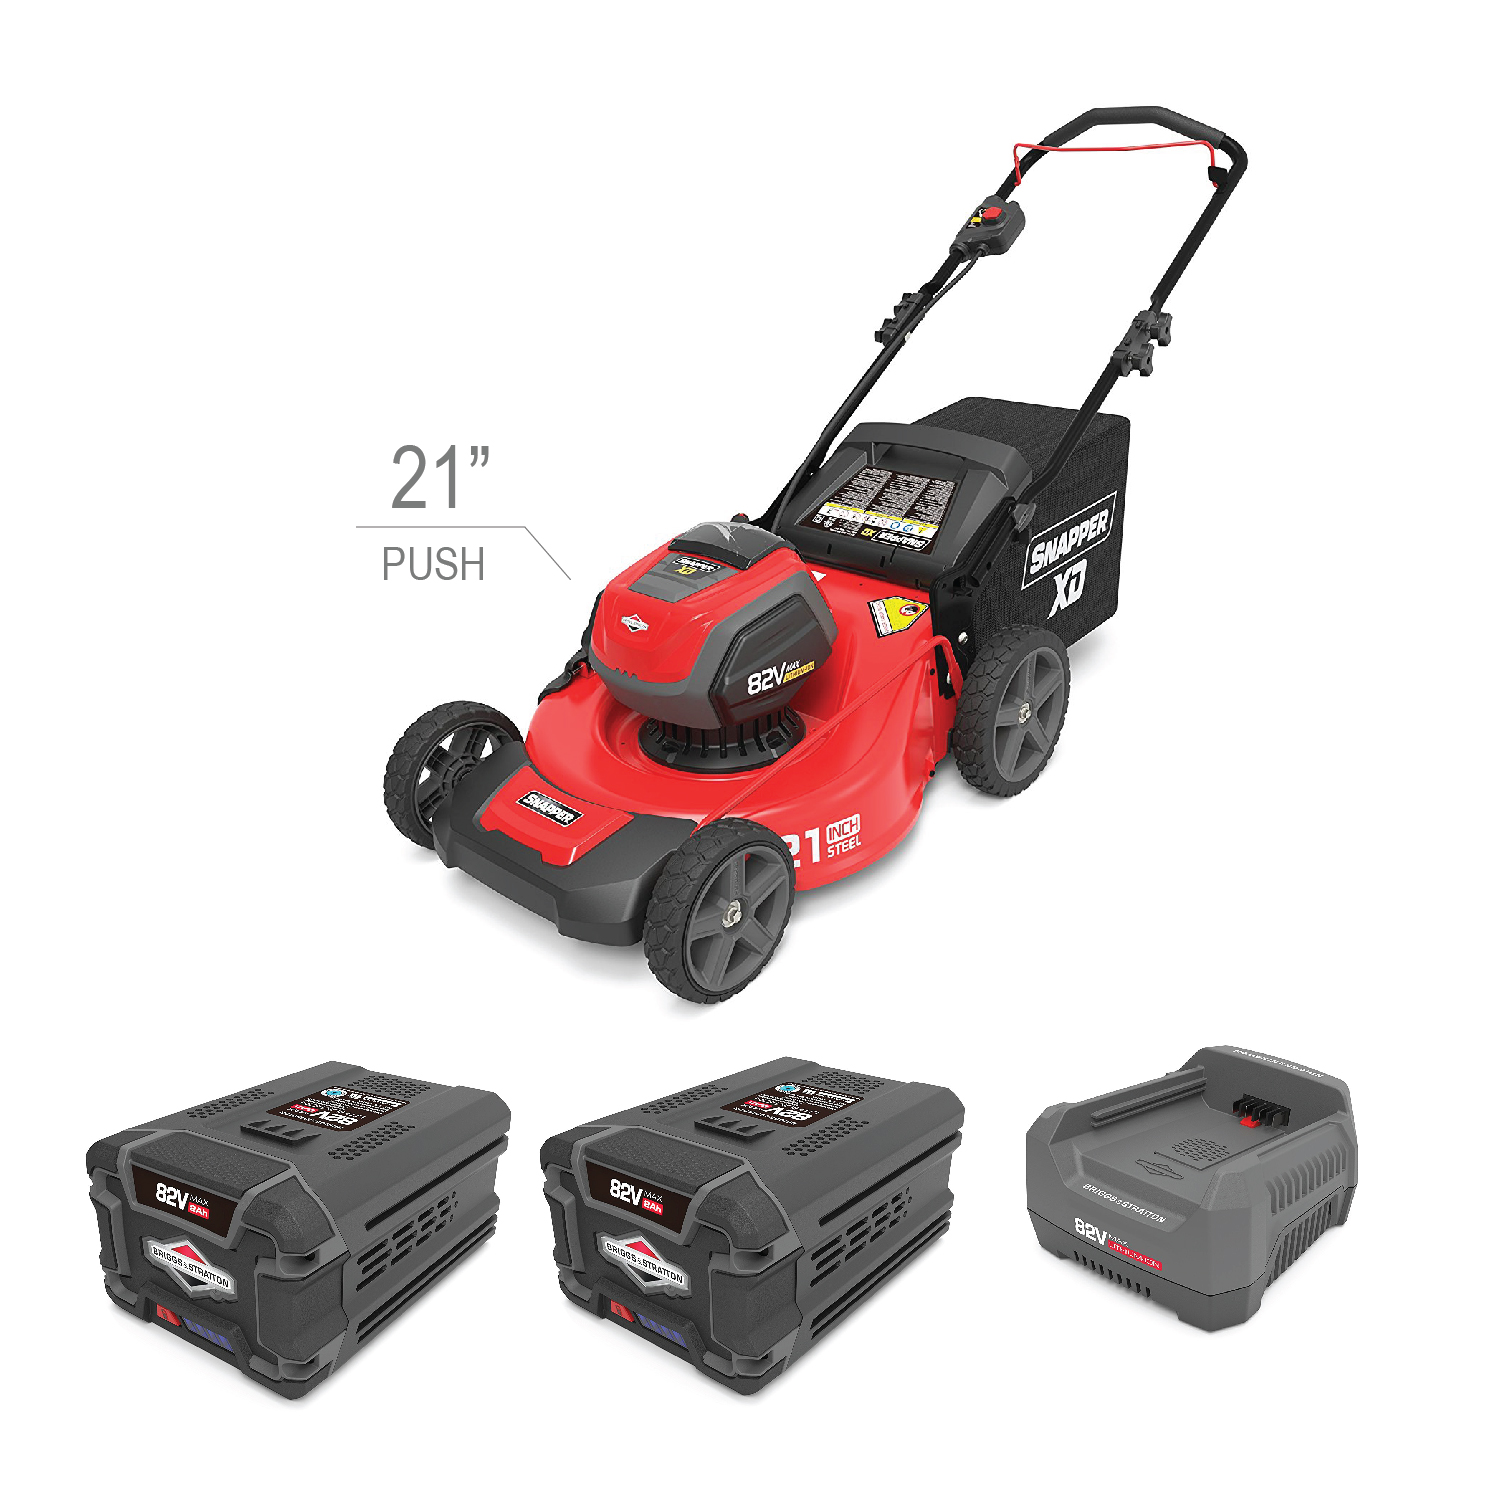 Kit Walk (push) Mower 21" 82V two 2AH Batteries & Charger - Click Image to Close